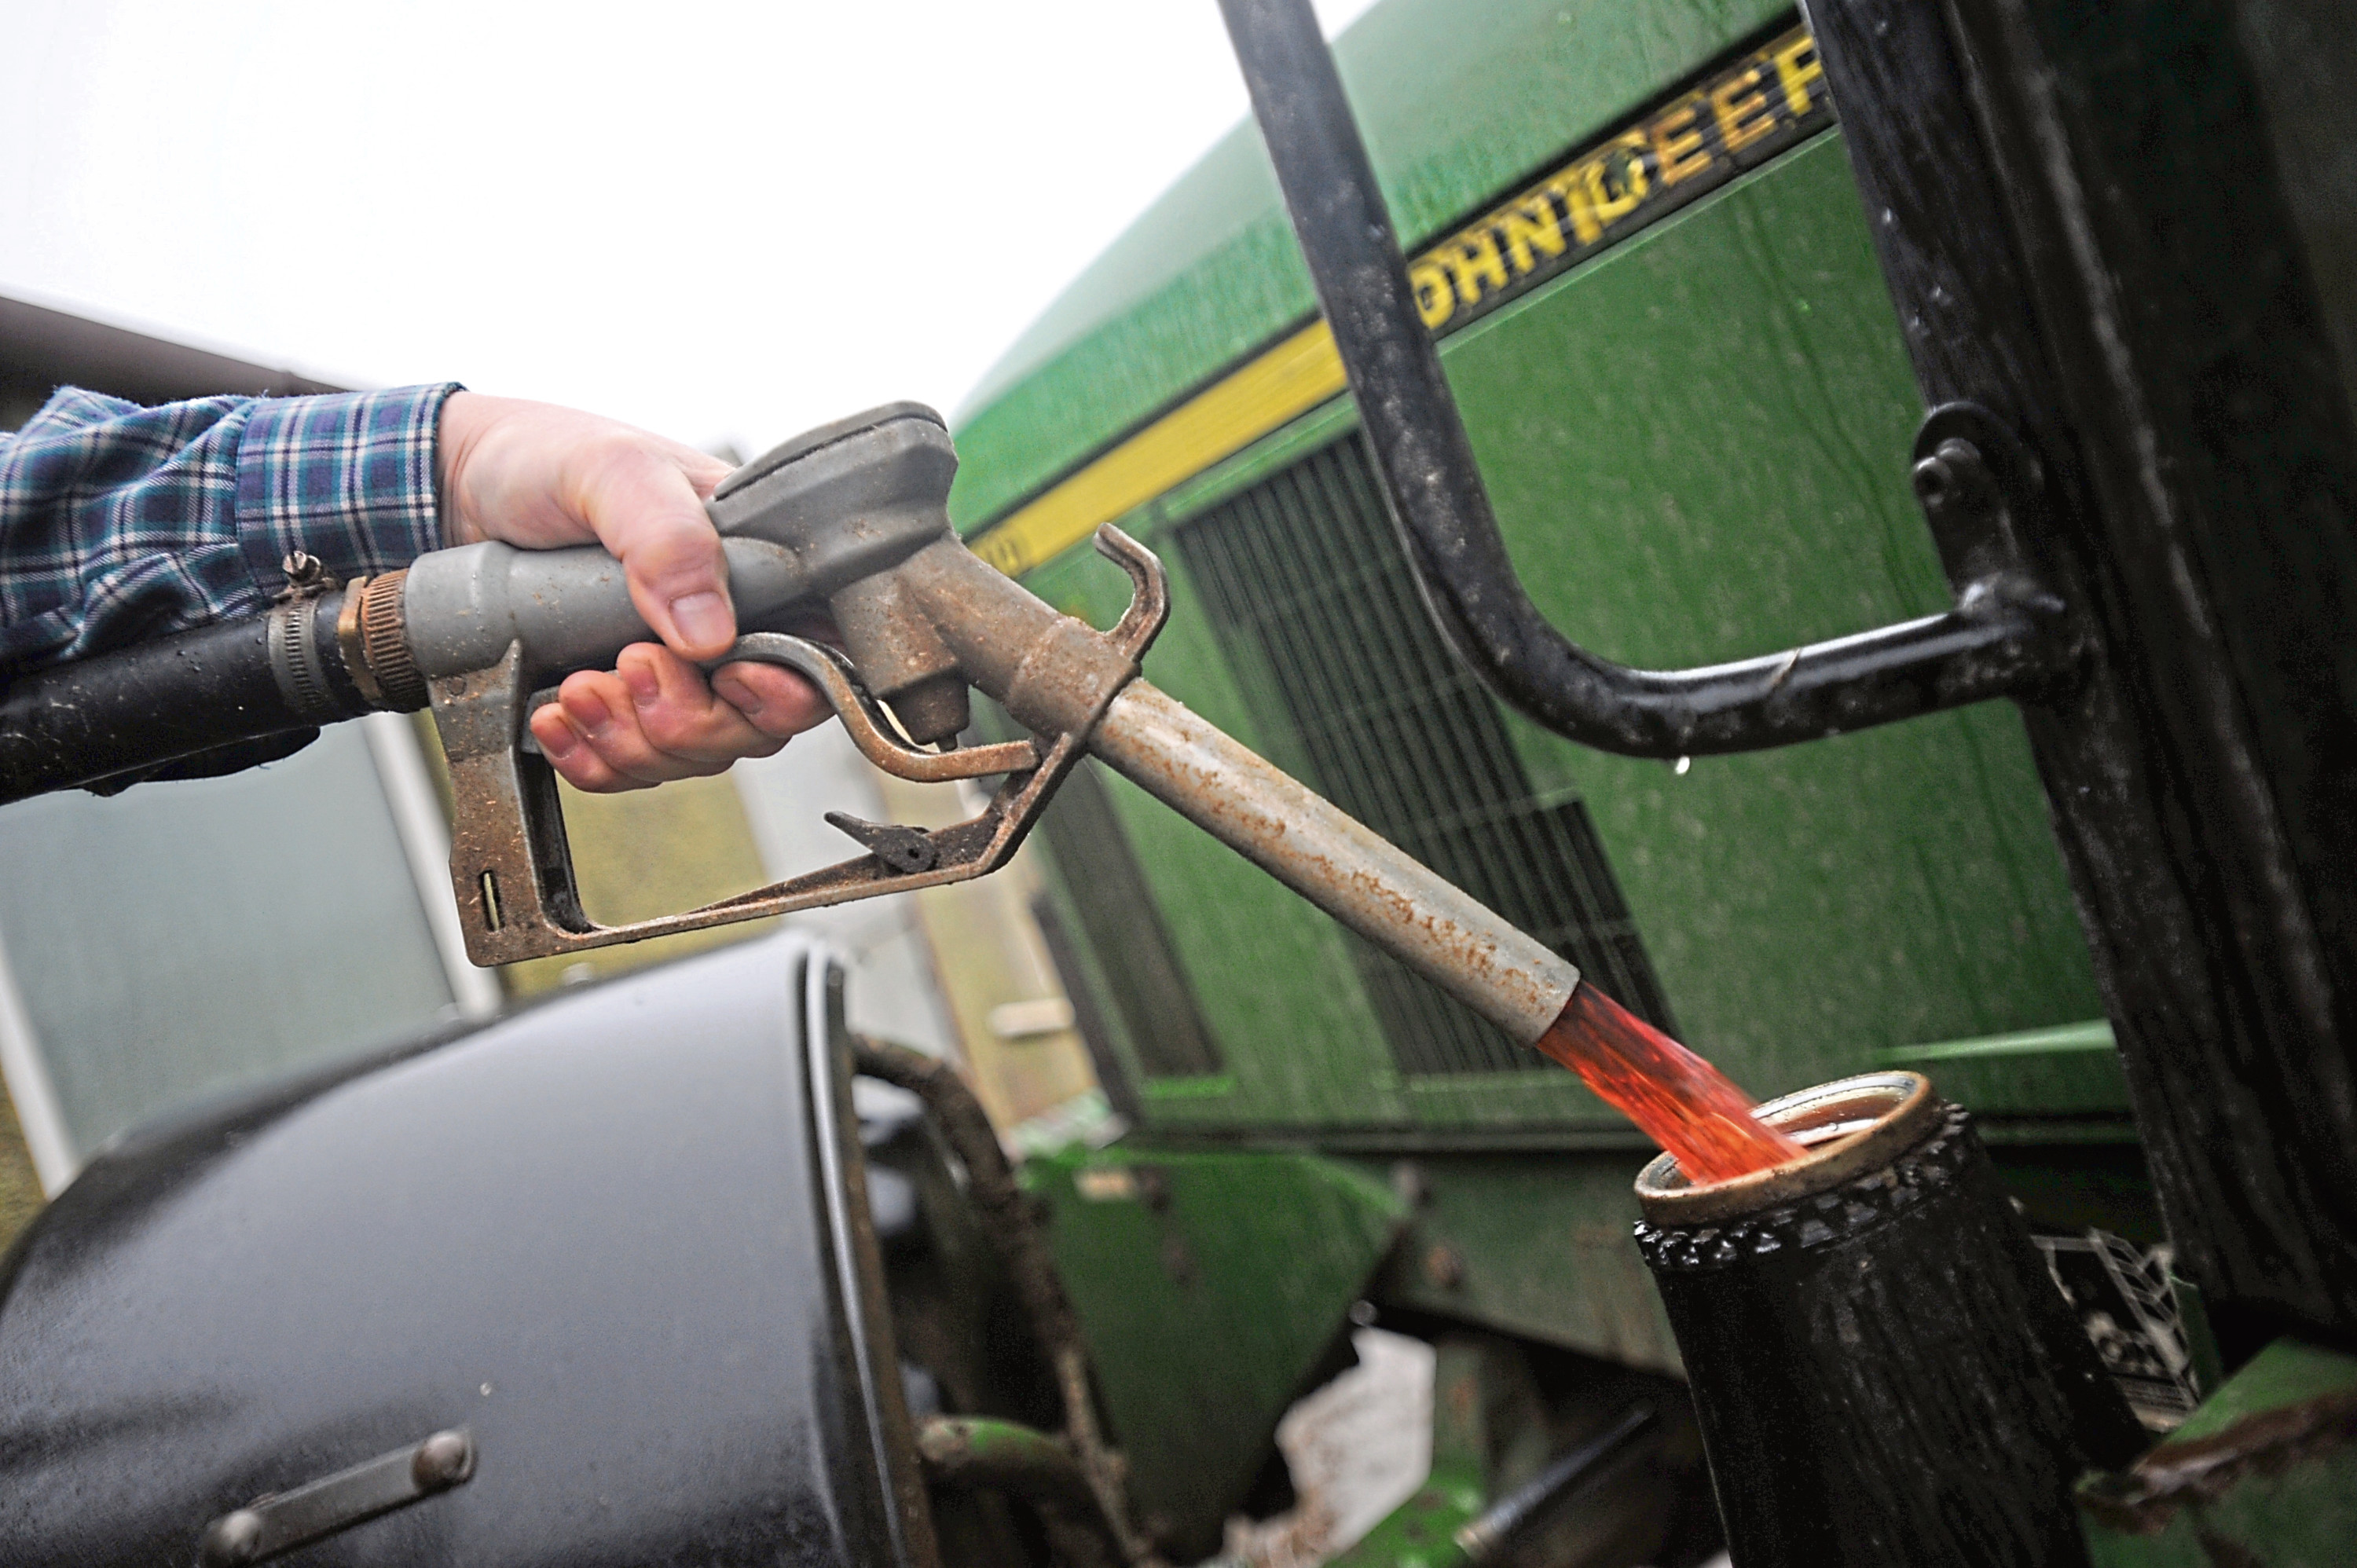 The issue has resulted in blocked filters on many tractors and farm machines.